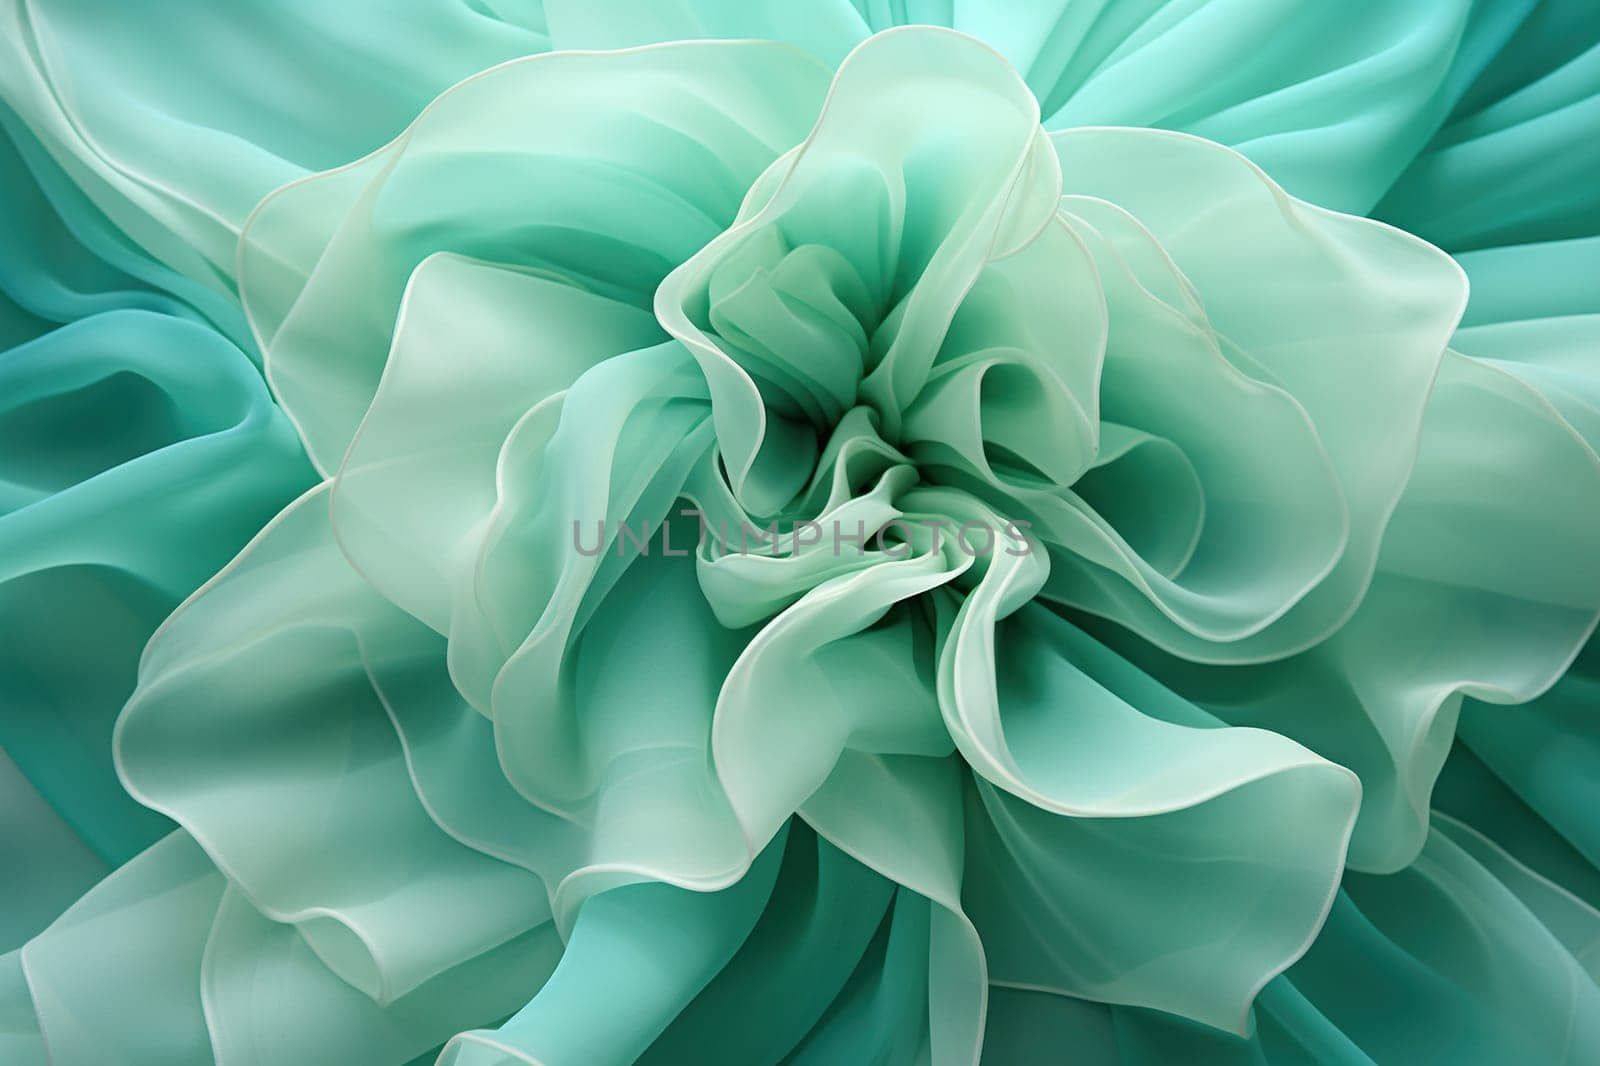 Wavy transparent turquoise fabric folded in the shape of a flower.